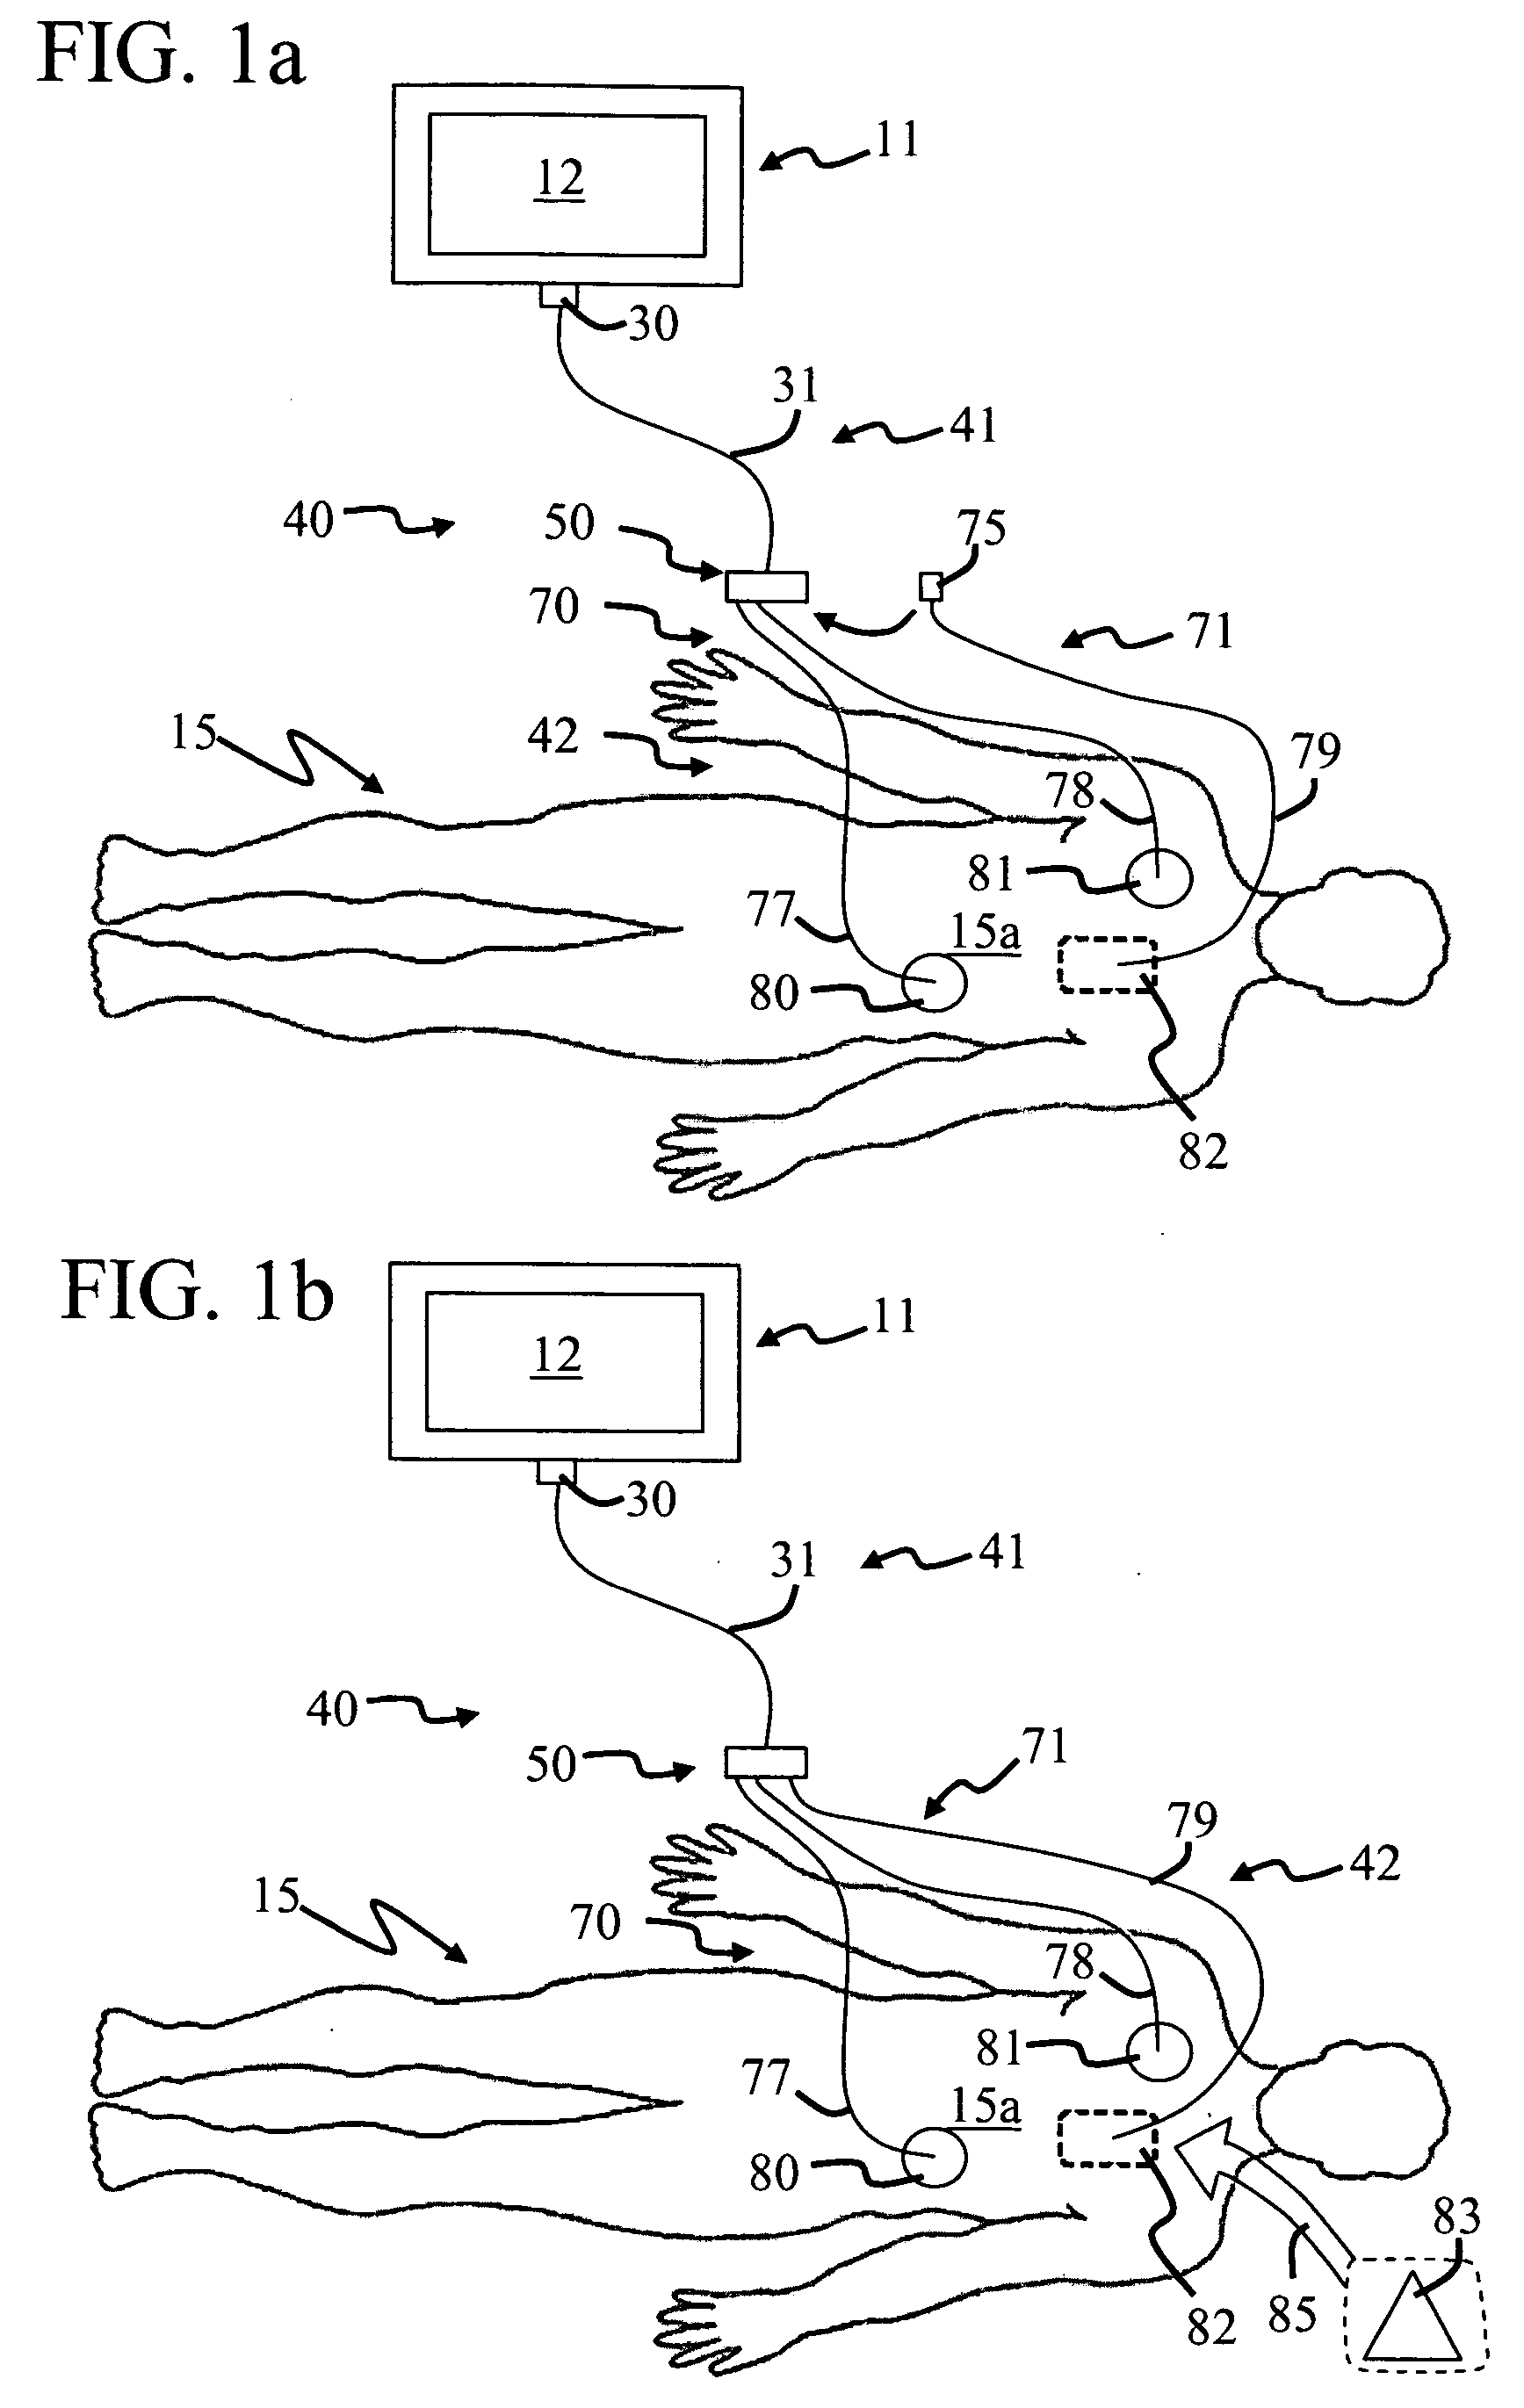 Electrode system for a physiological stimulator